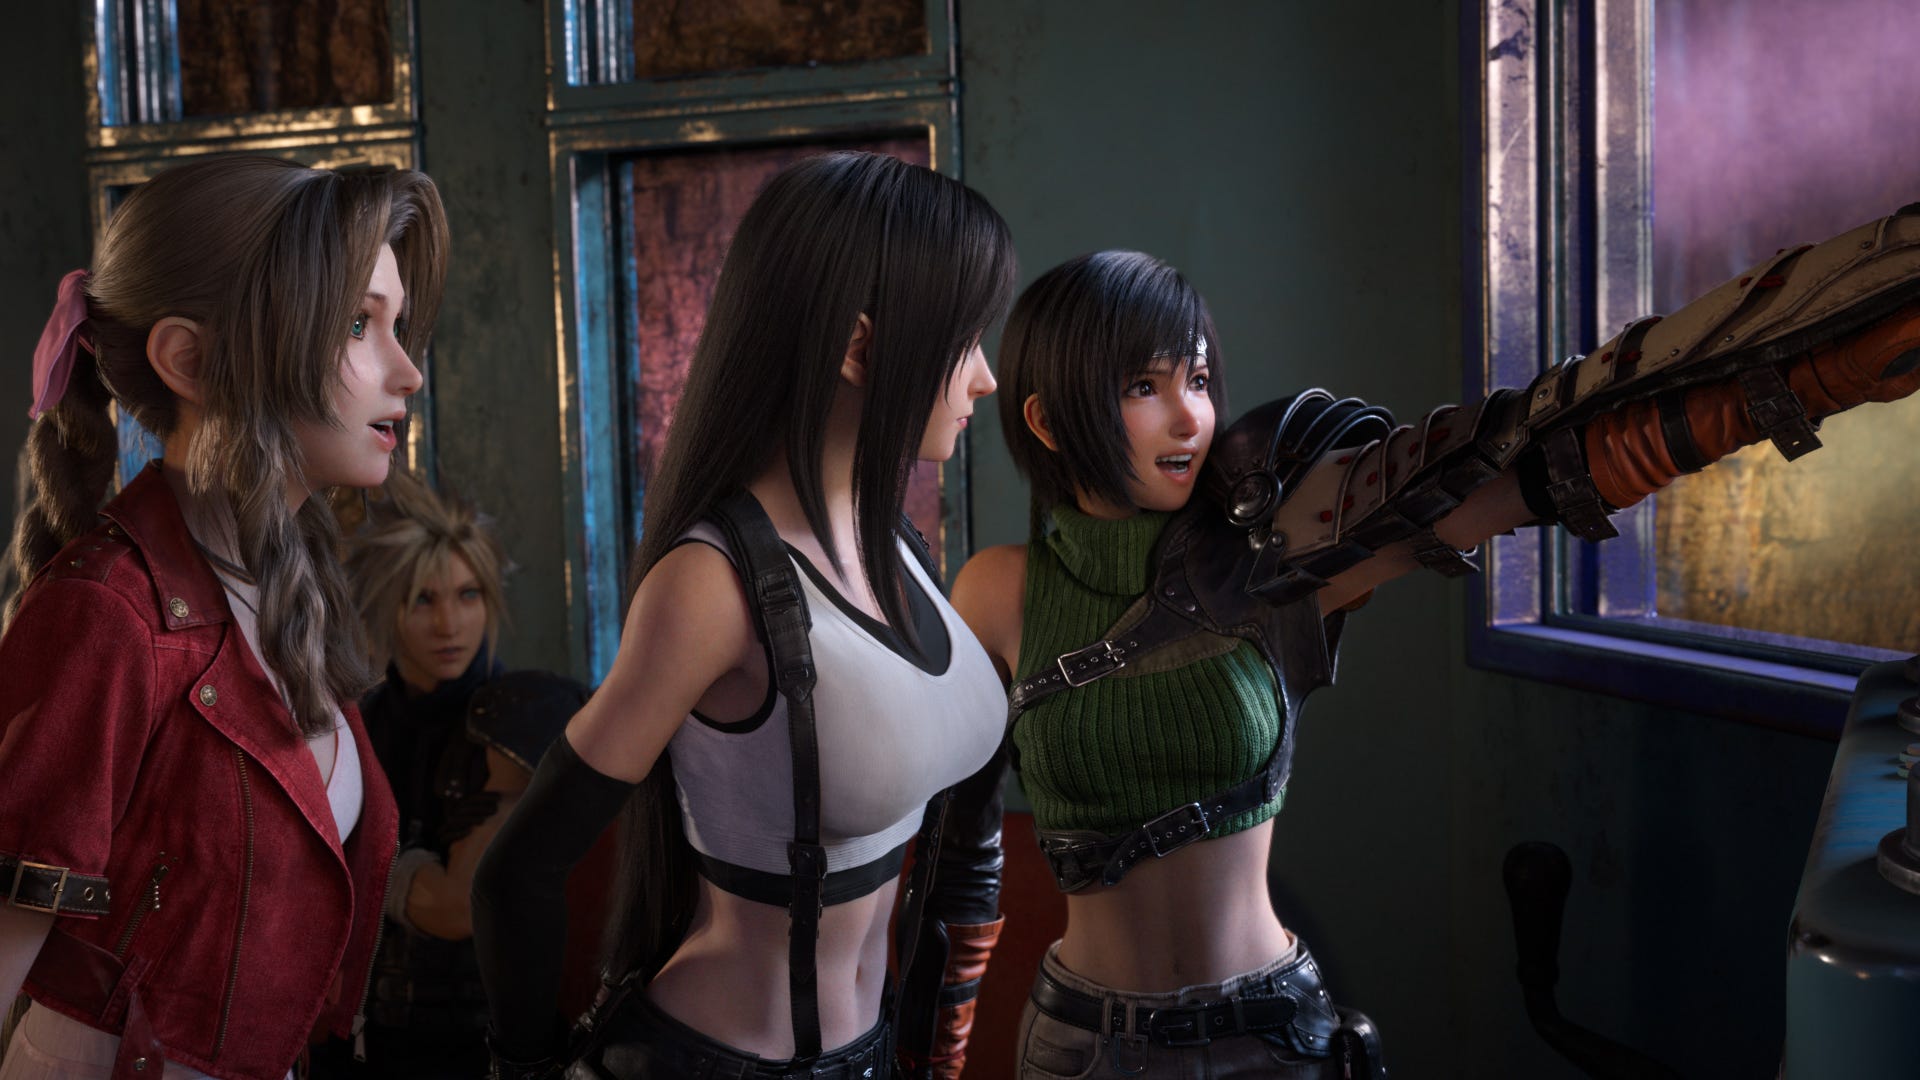 Final Fantasy 7 Remake part 3 might be out sooner than you'd think